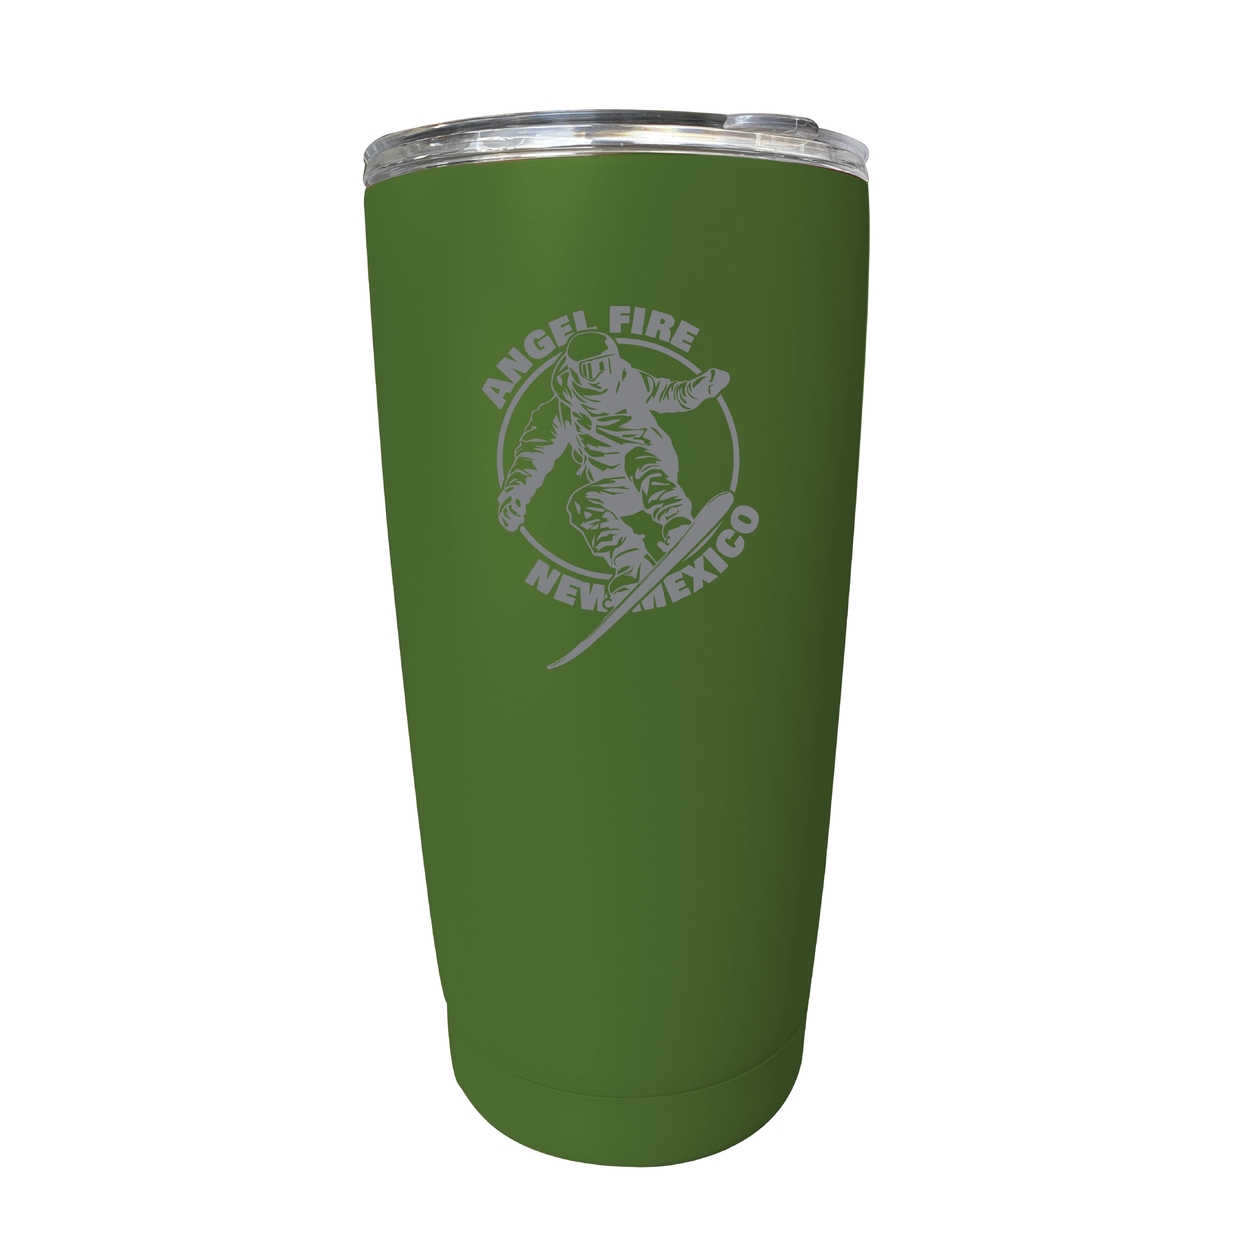 Angel Fire New Mexico Souvenir 16 Oz Engraved Stainless Steel Insulated Tumbler - Green,,2-Pack